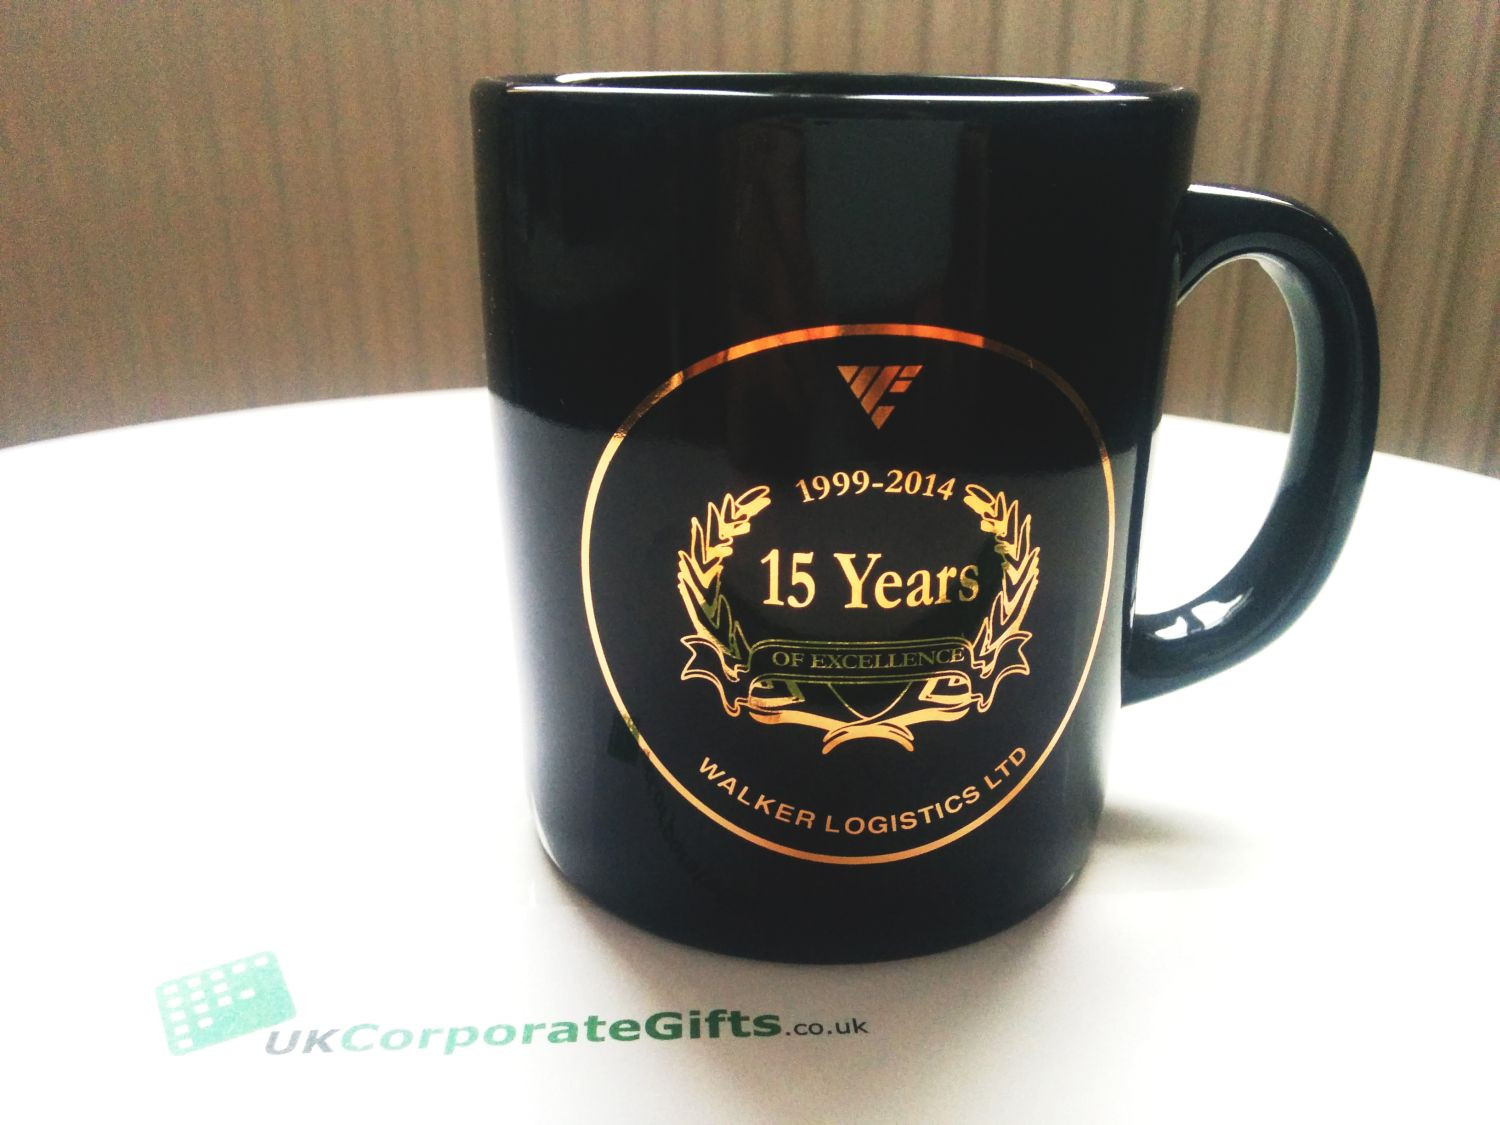 10 Unique Corporate Anniversary Gift Ideas to Celebrate Your Employees ...